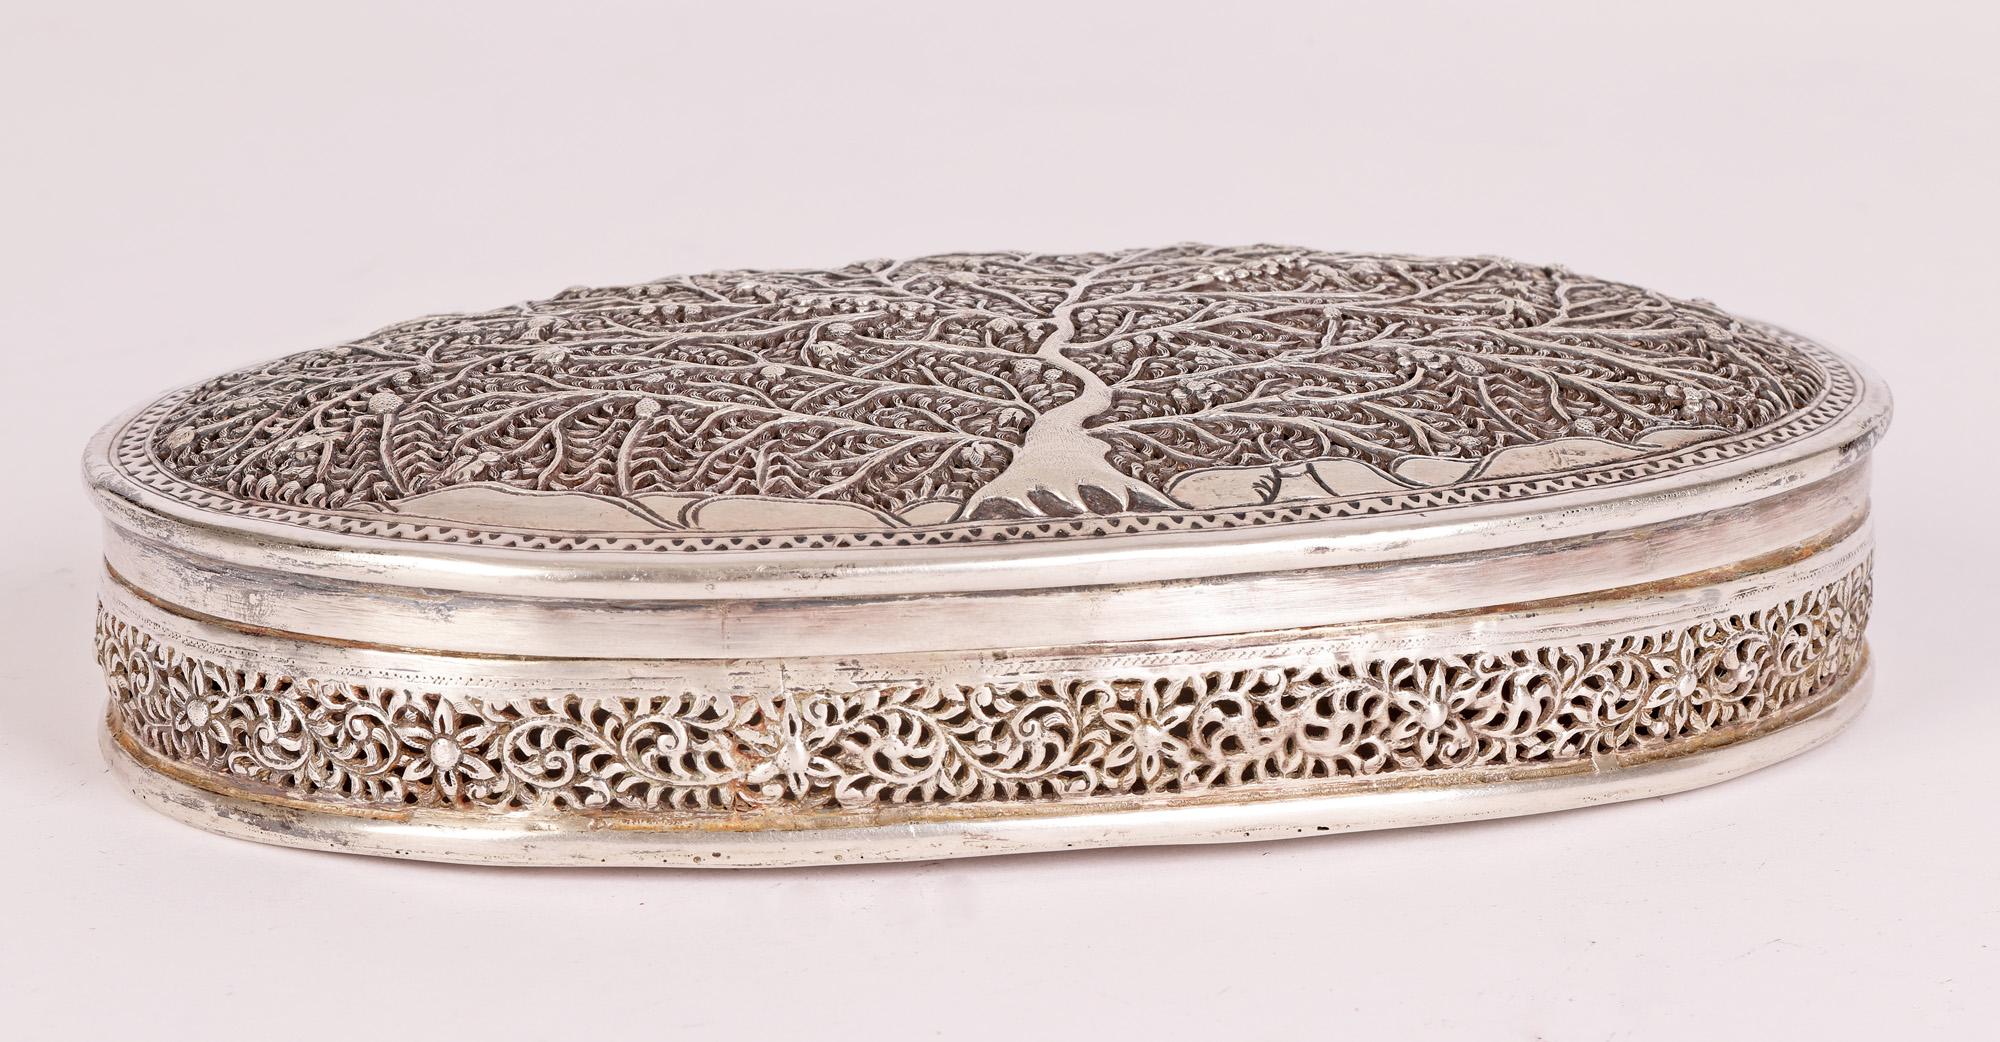 An unusual and very fine antique Burmese silver oval box the cover decorated with a Tree of Life probably dating from the early 20th Century. The box is of flat oval shape with finely pierced cover and sides standing on a flat base. The hinged cover